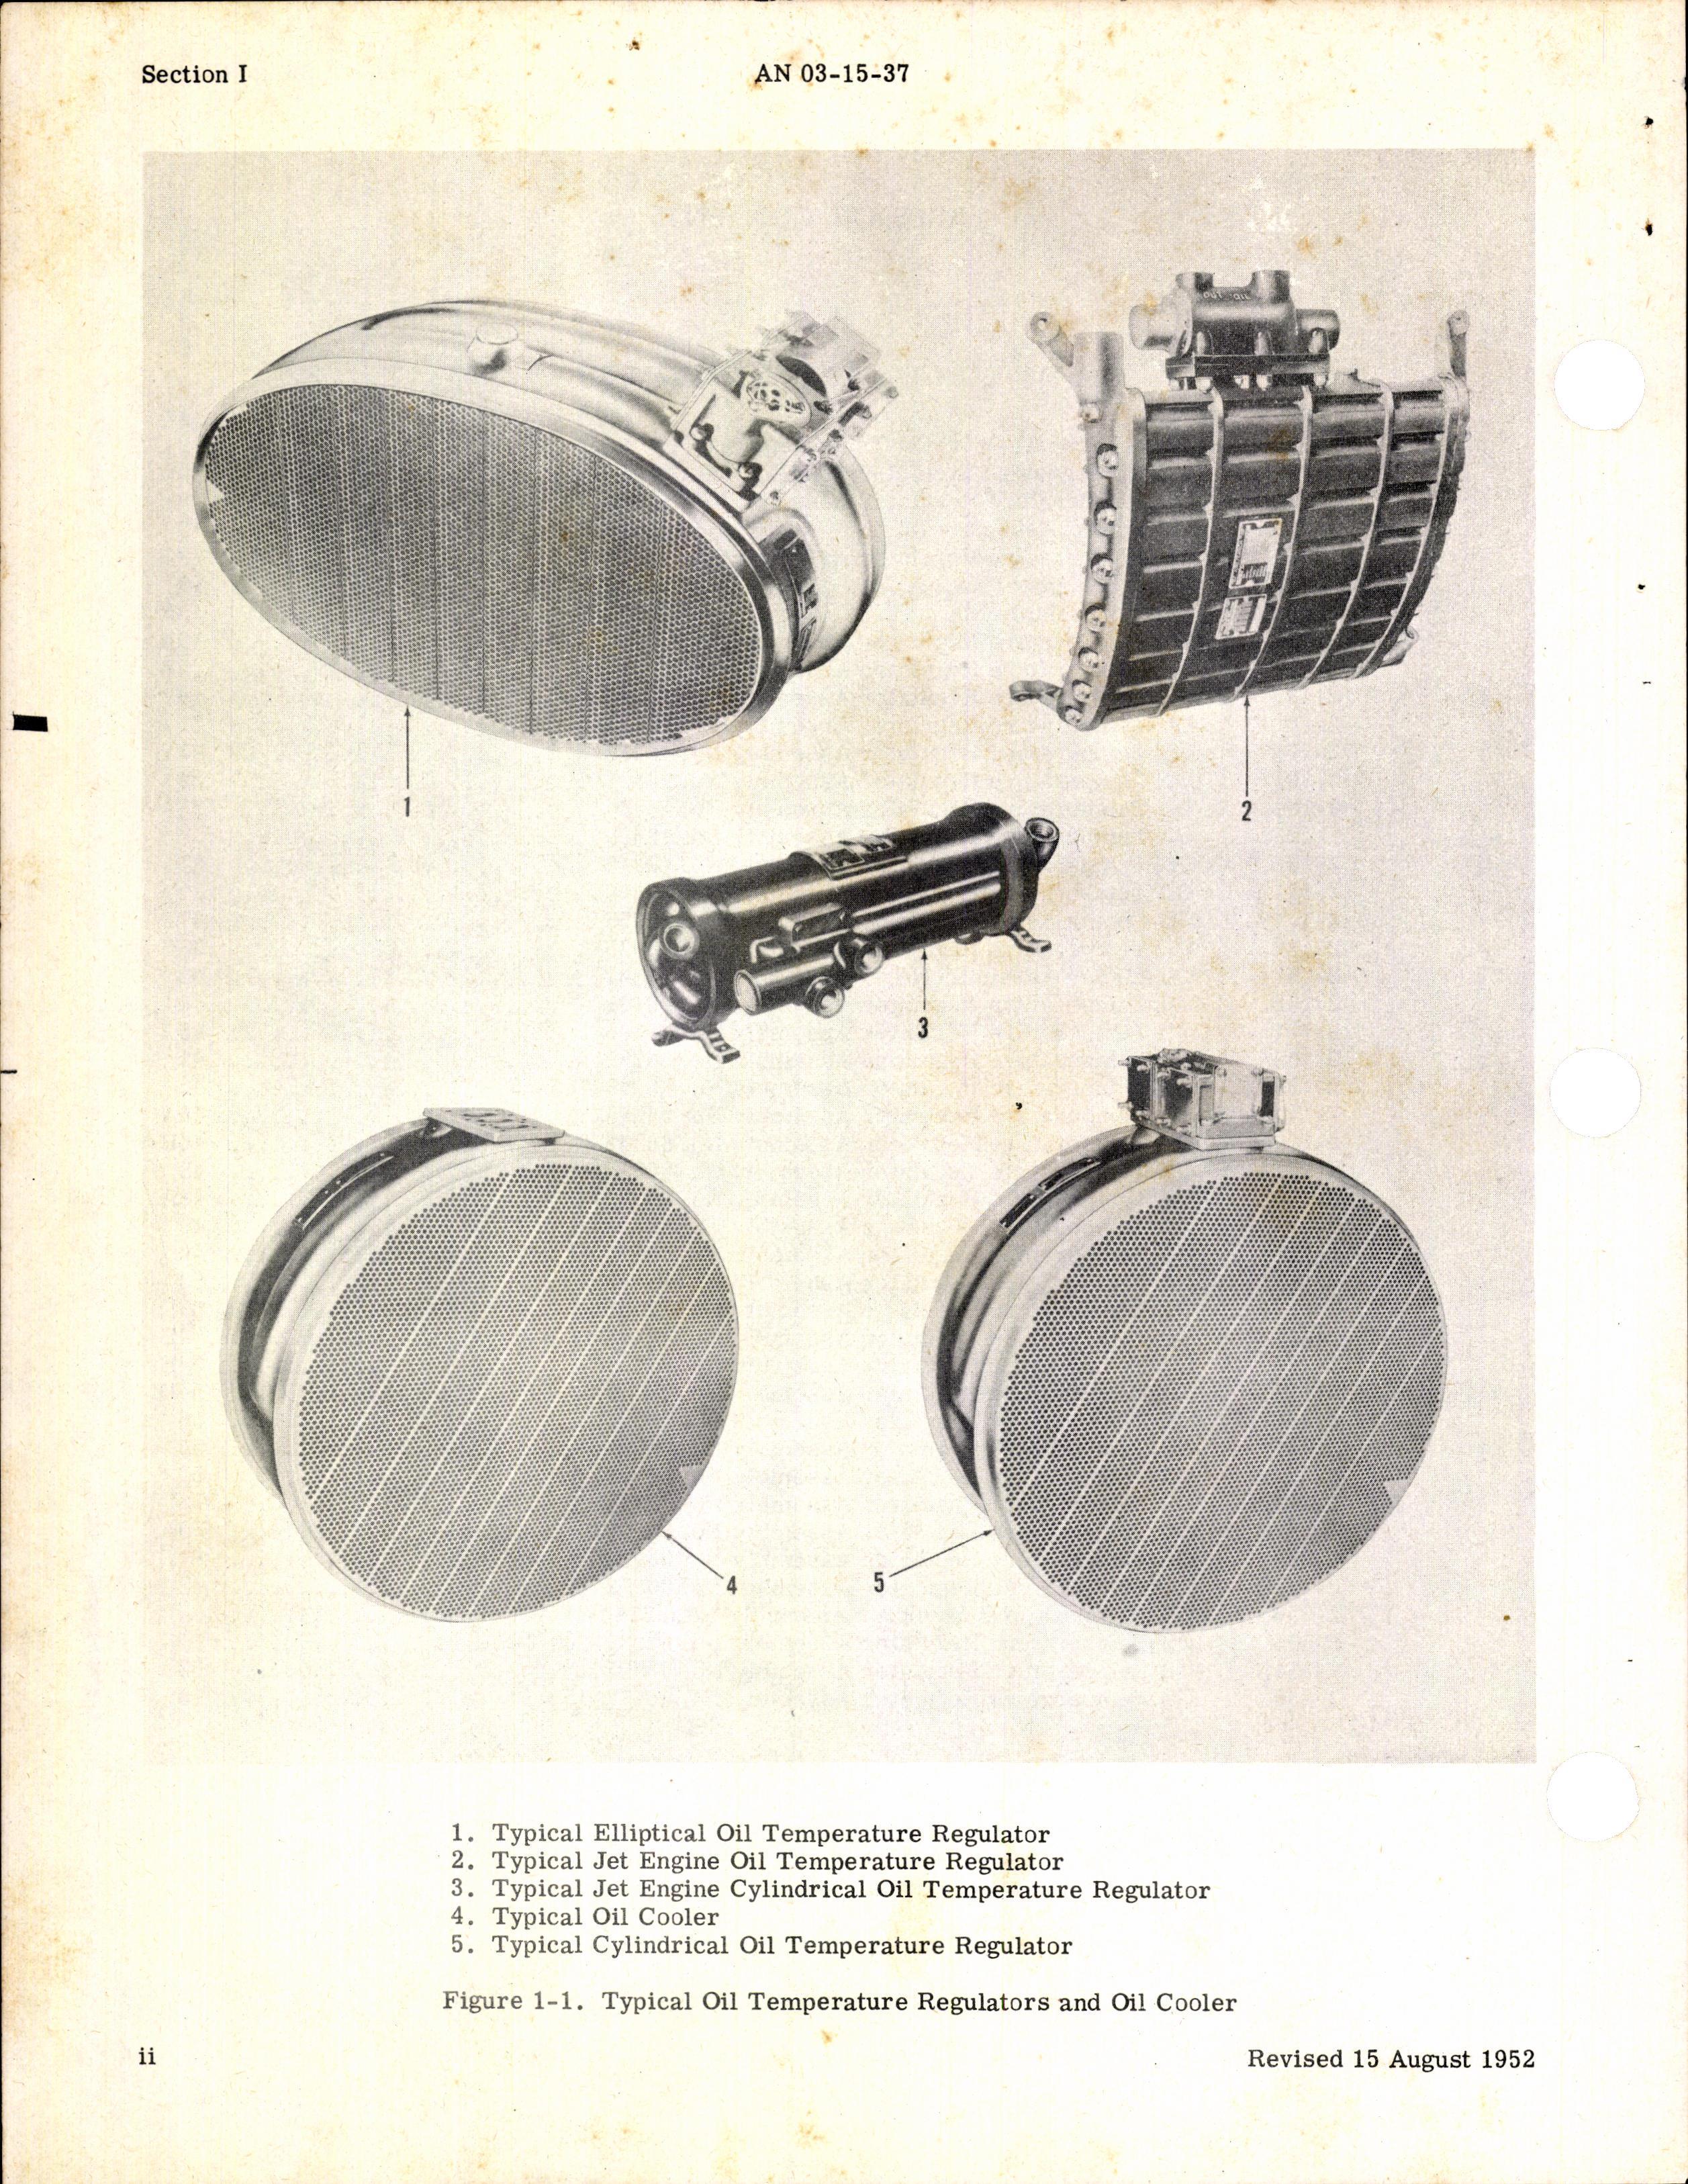 Sample page 4 from AirCorps Library document: Overhaul Instructions for Airesearch Oil Temperature Regulators, Oil Coolers, and Valves